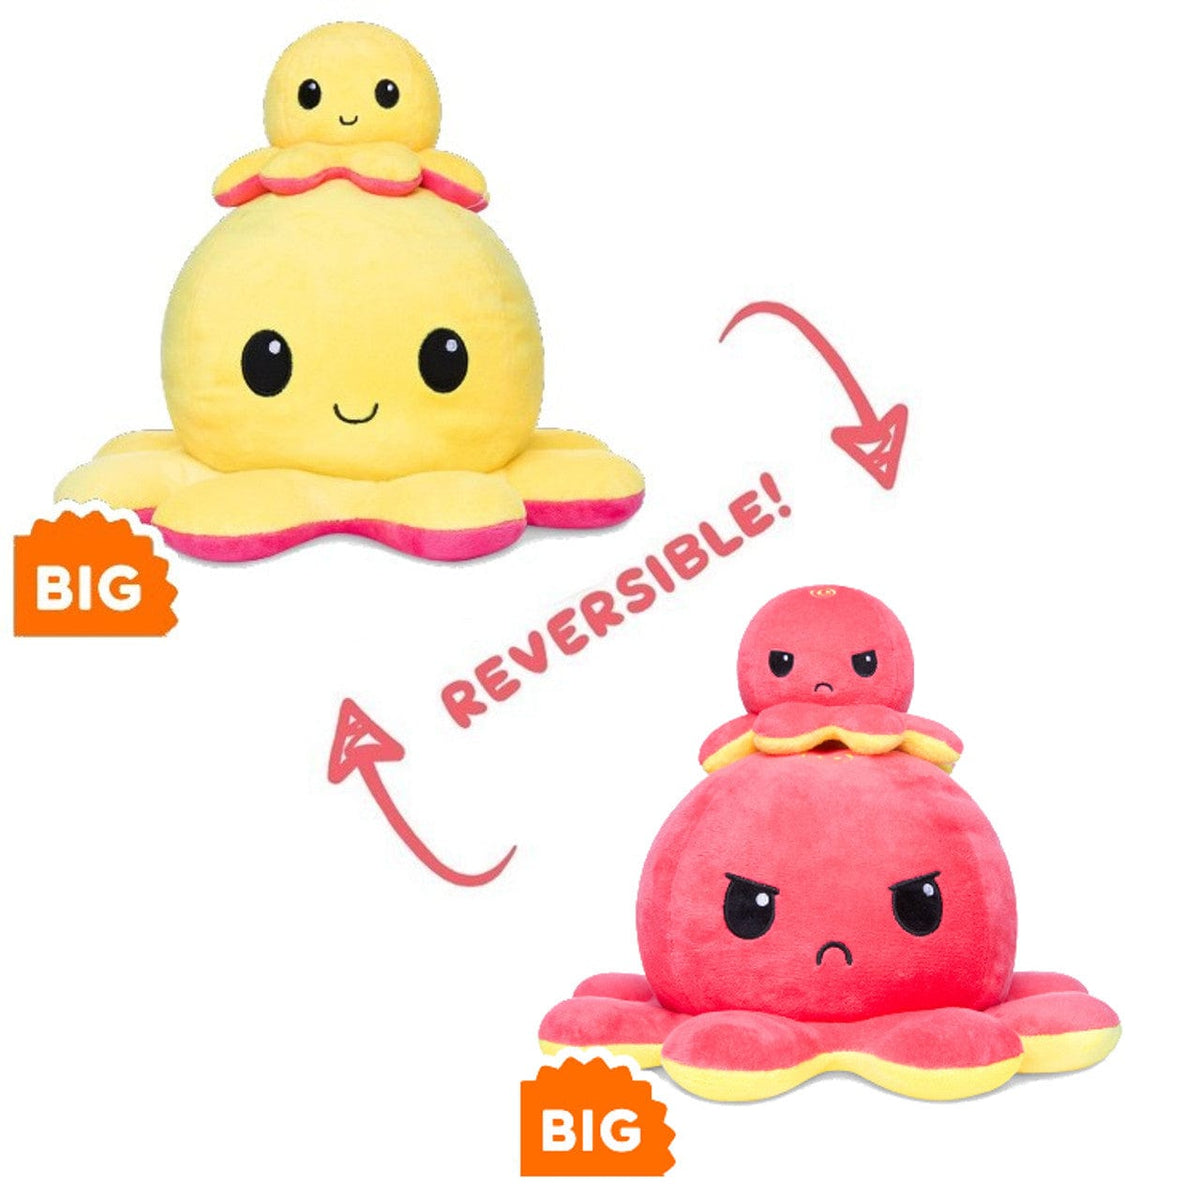 BIG Reversible Octopus Plushie: Happy Yellow and Angry Red - Third Eye